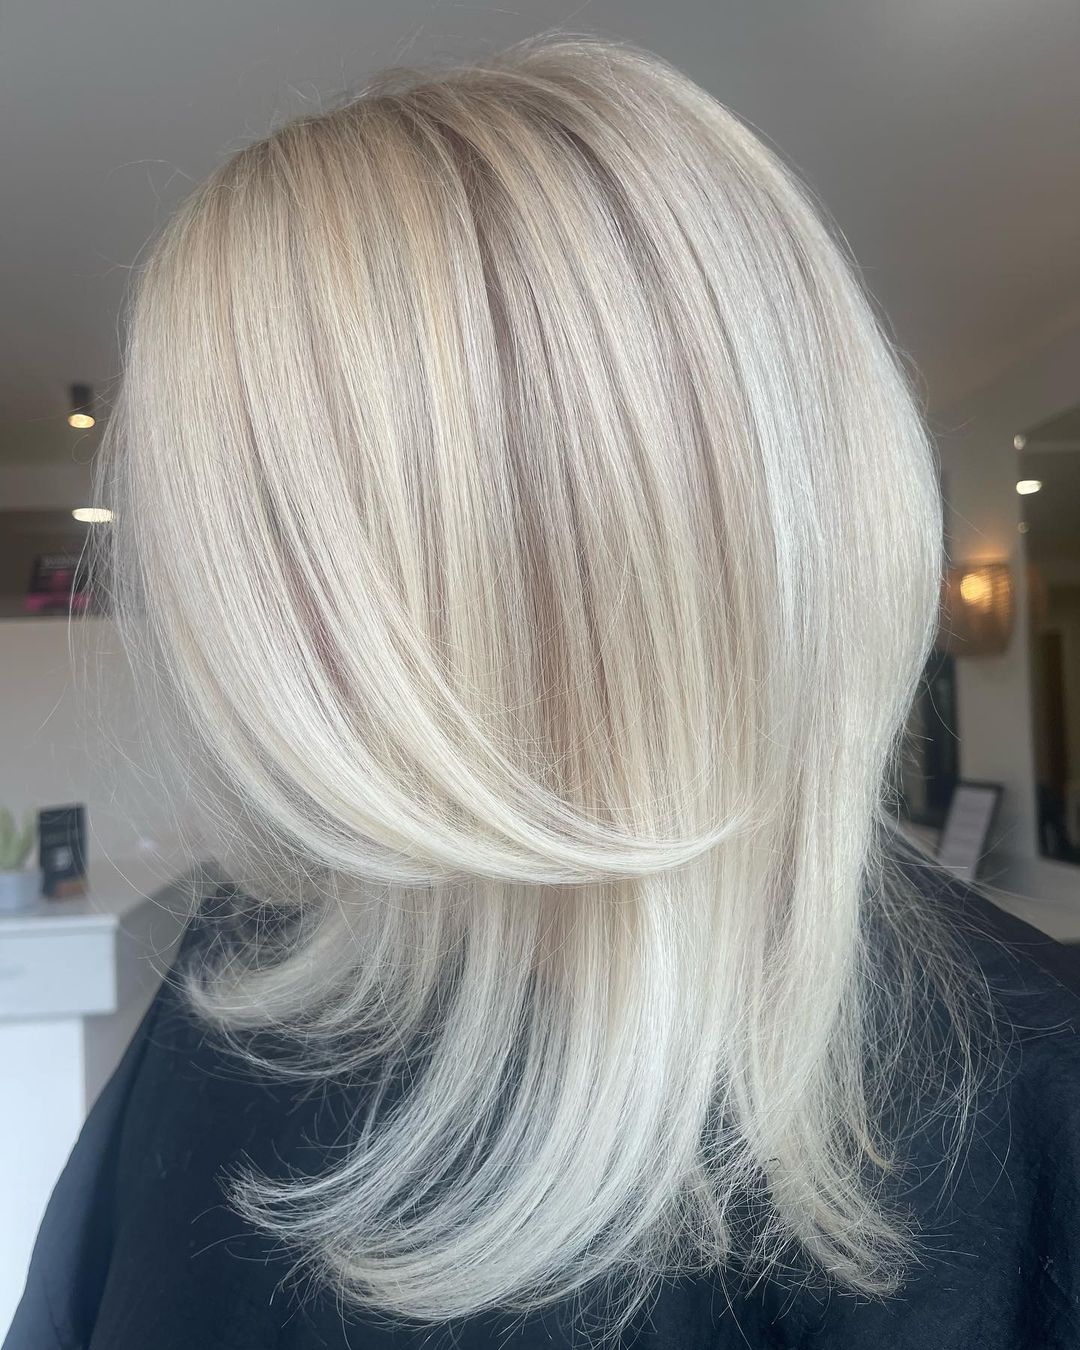 Blonde Hair Colour Specialists in Cheshire at Louise Fudge Hair Salon